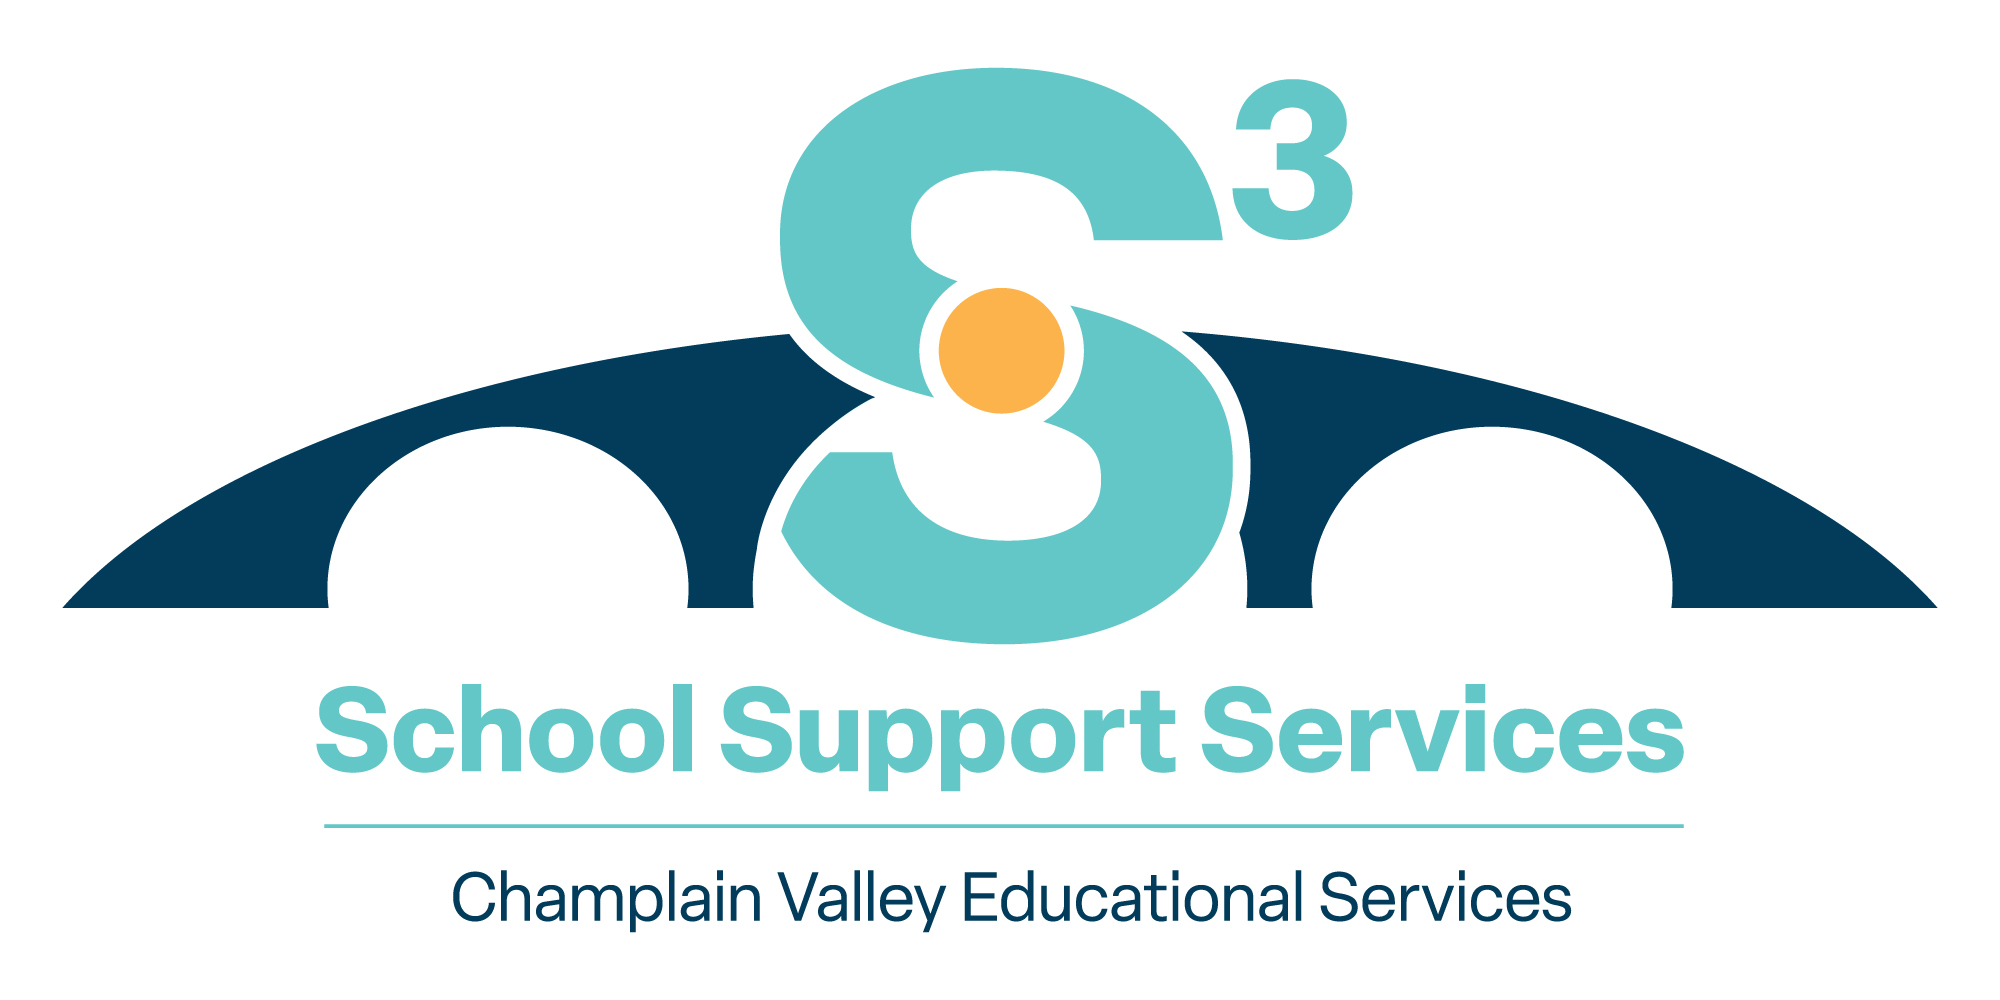 School Support Services home page